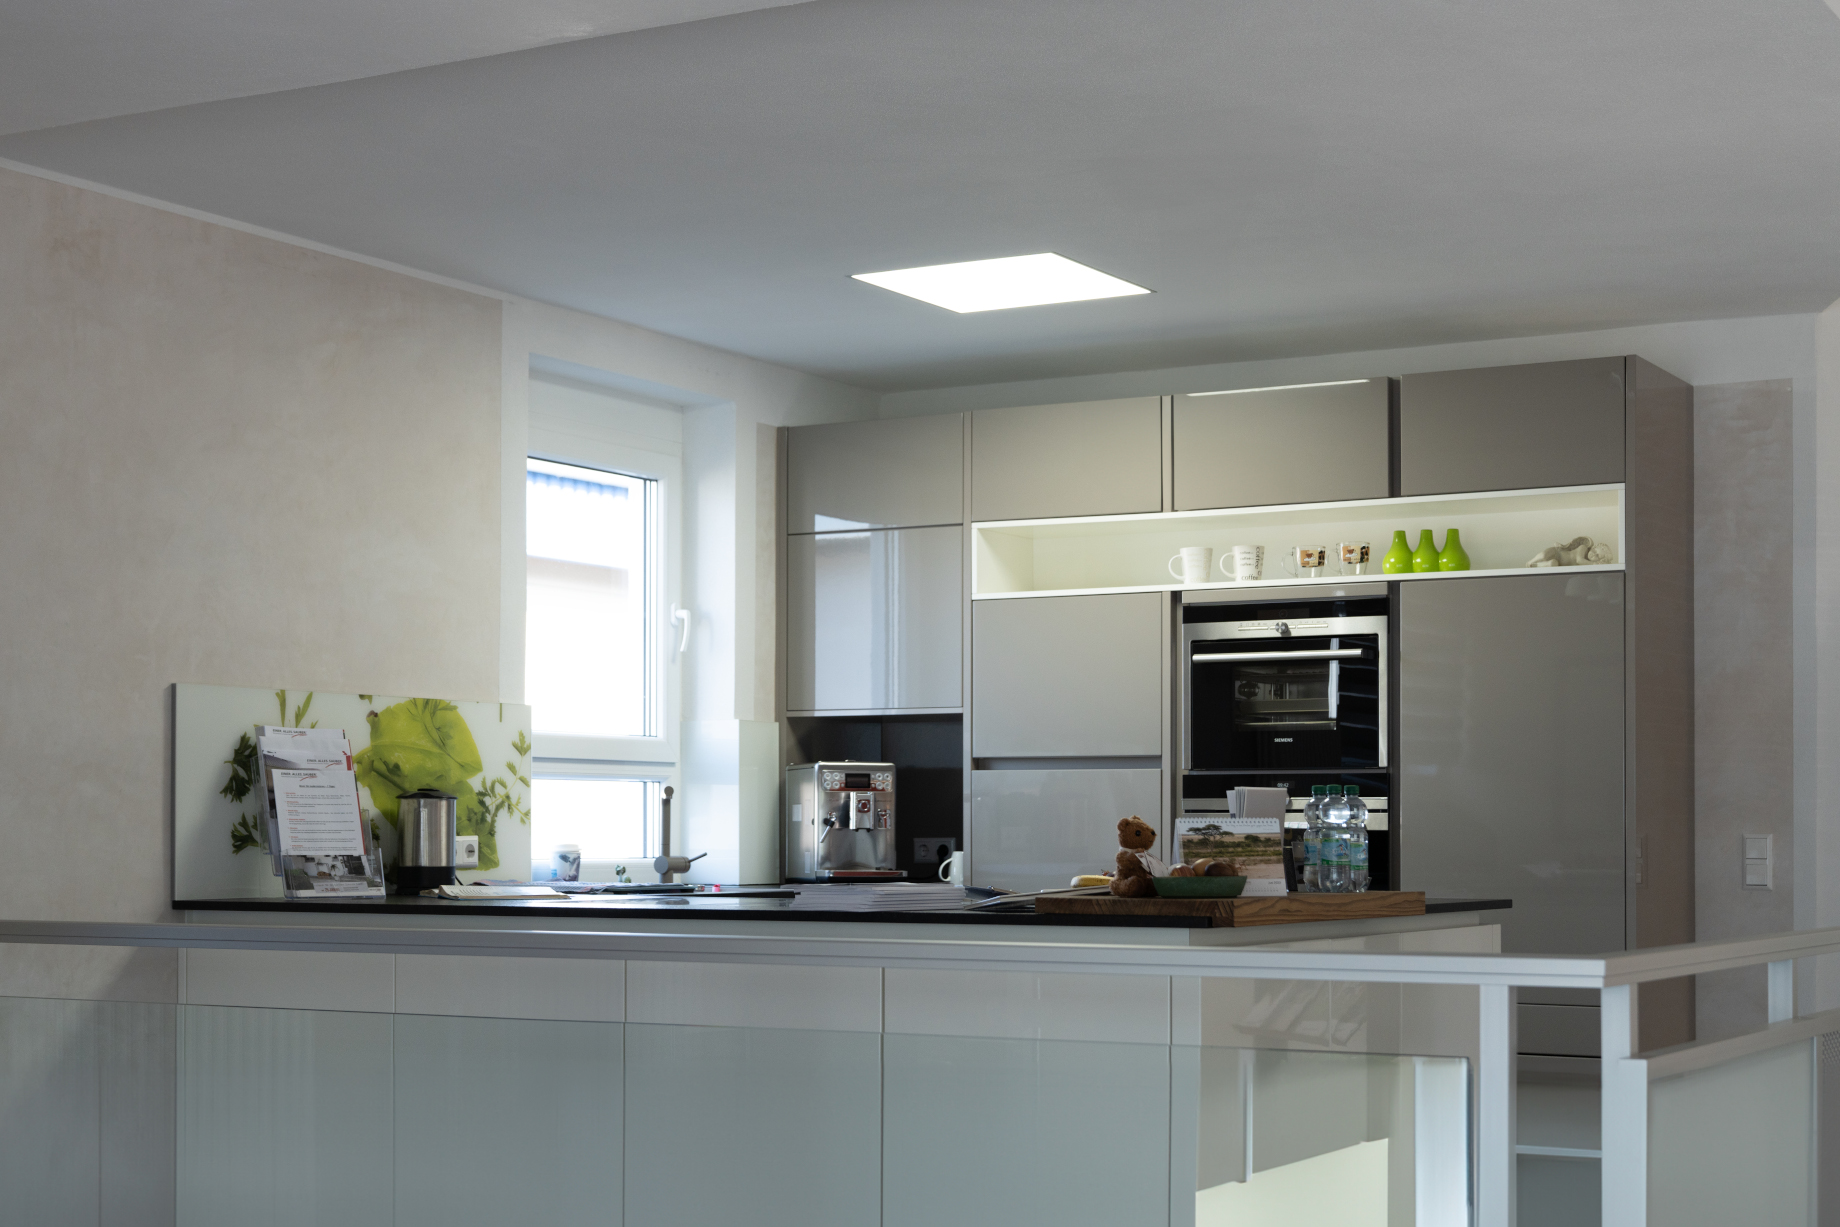 A well designed kitchen, illuminated with the Richter revilight